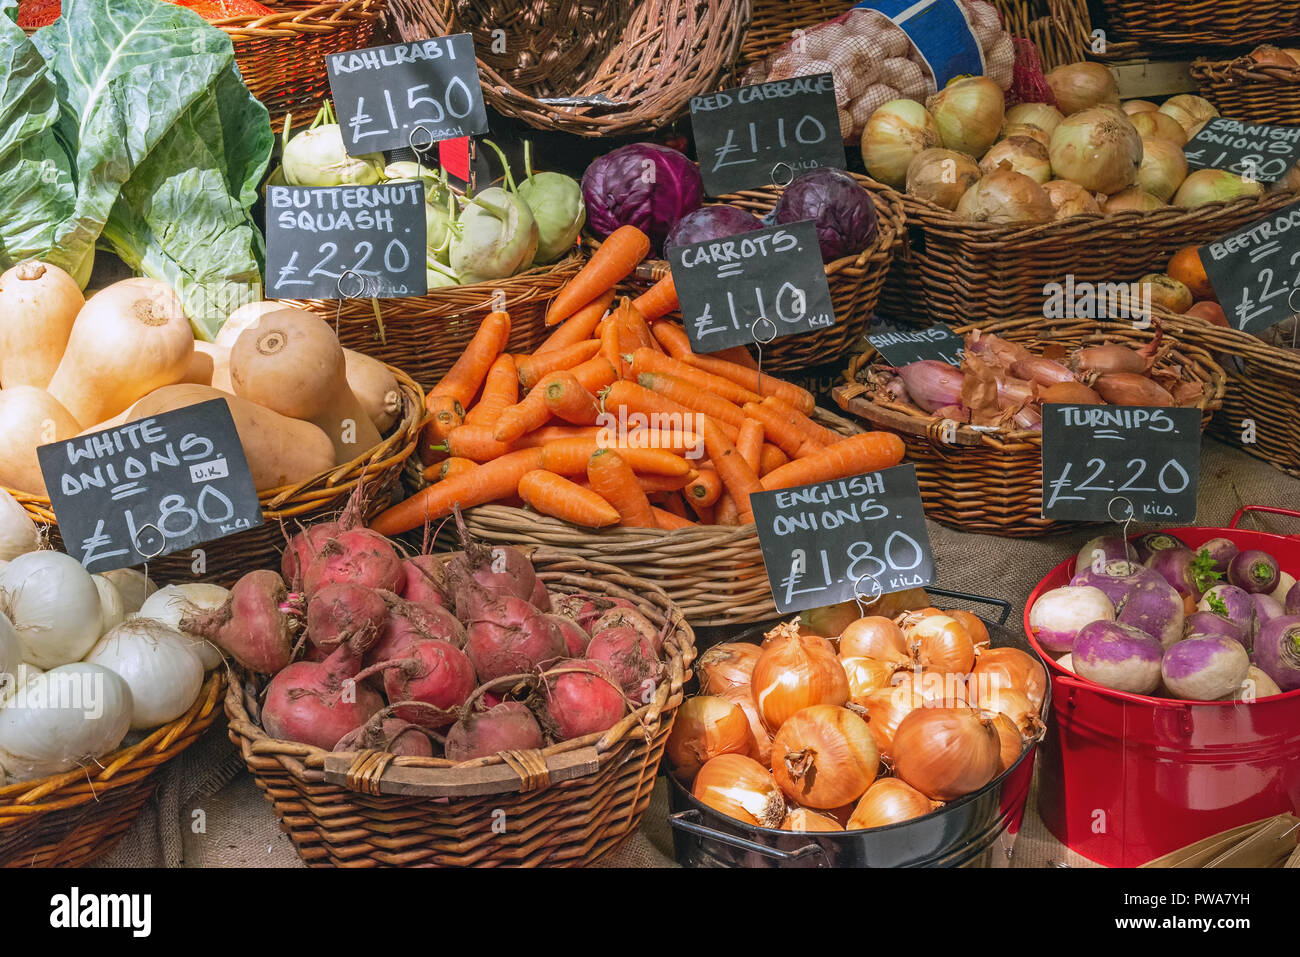 Onions, carrots and other vegetables for sale at a market in London Stock Photo